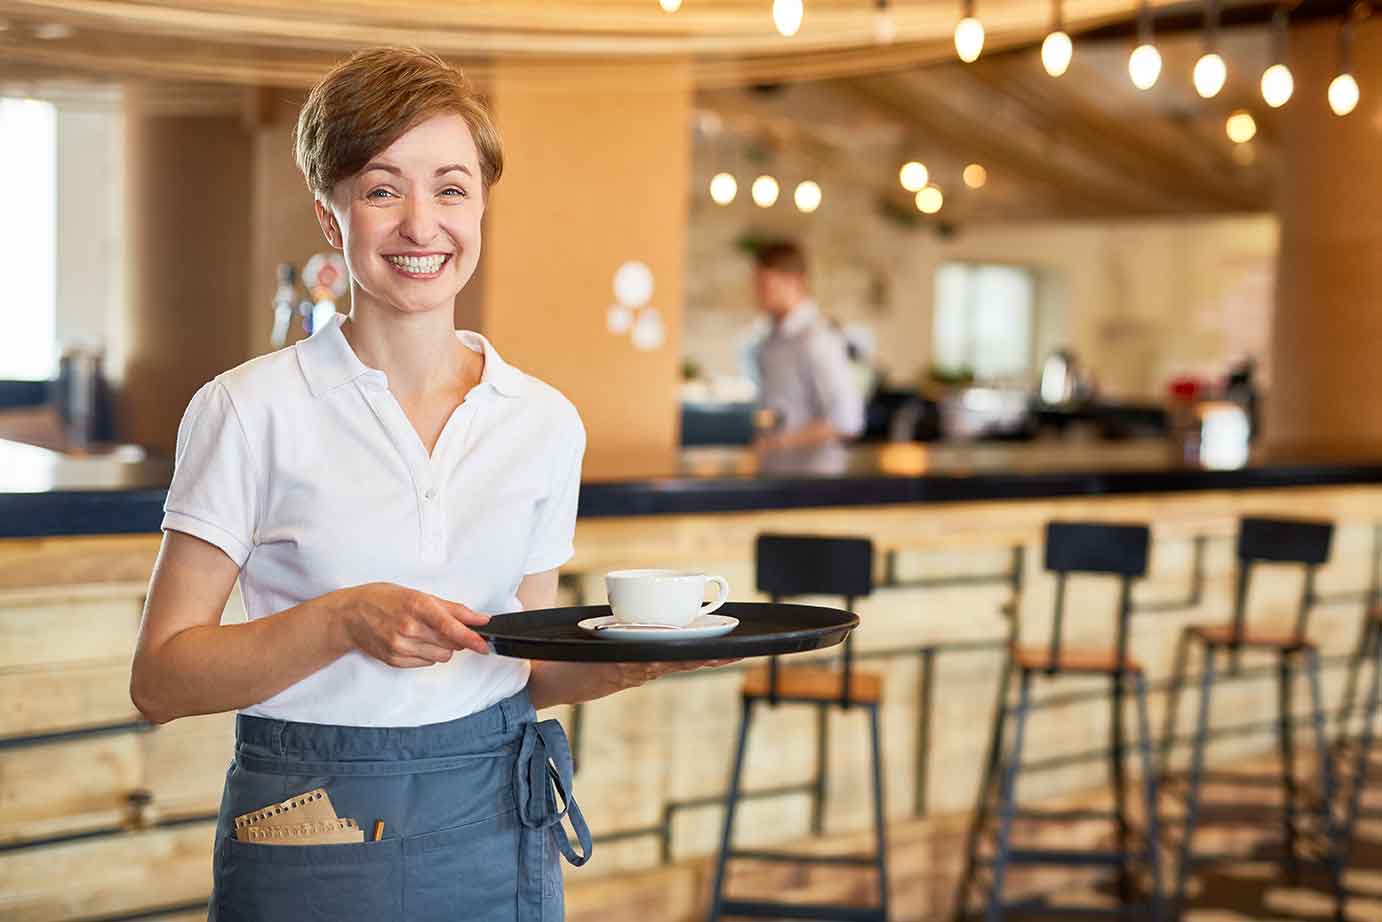 Working as a Waiter, Waitress or F&B Server in Malta